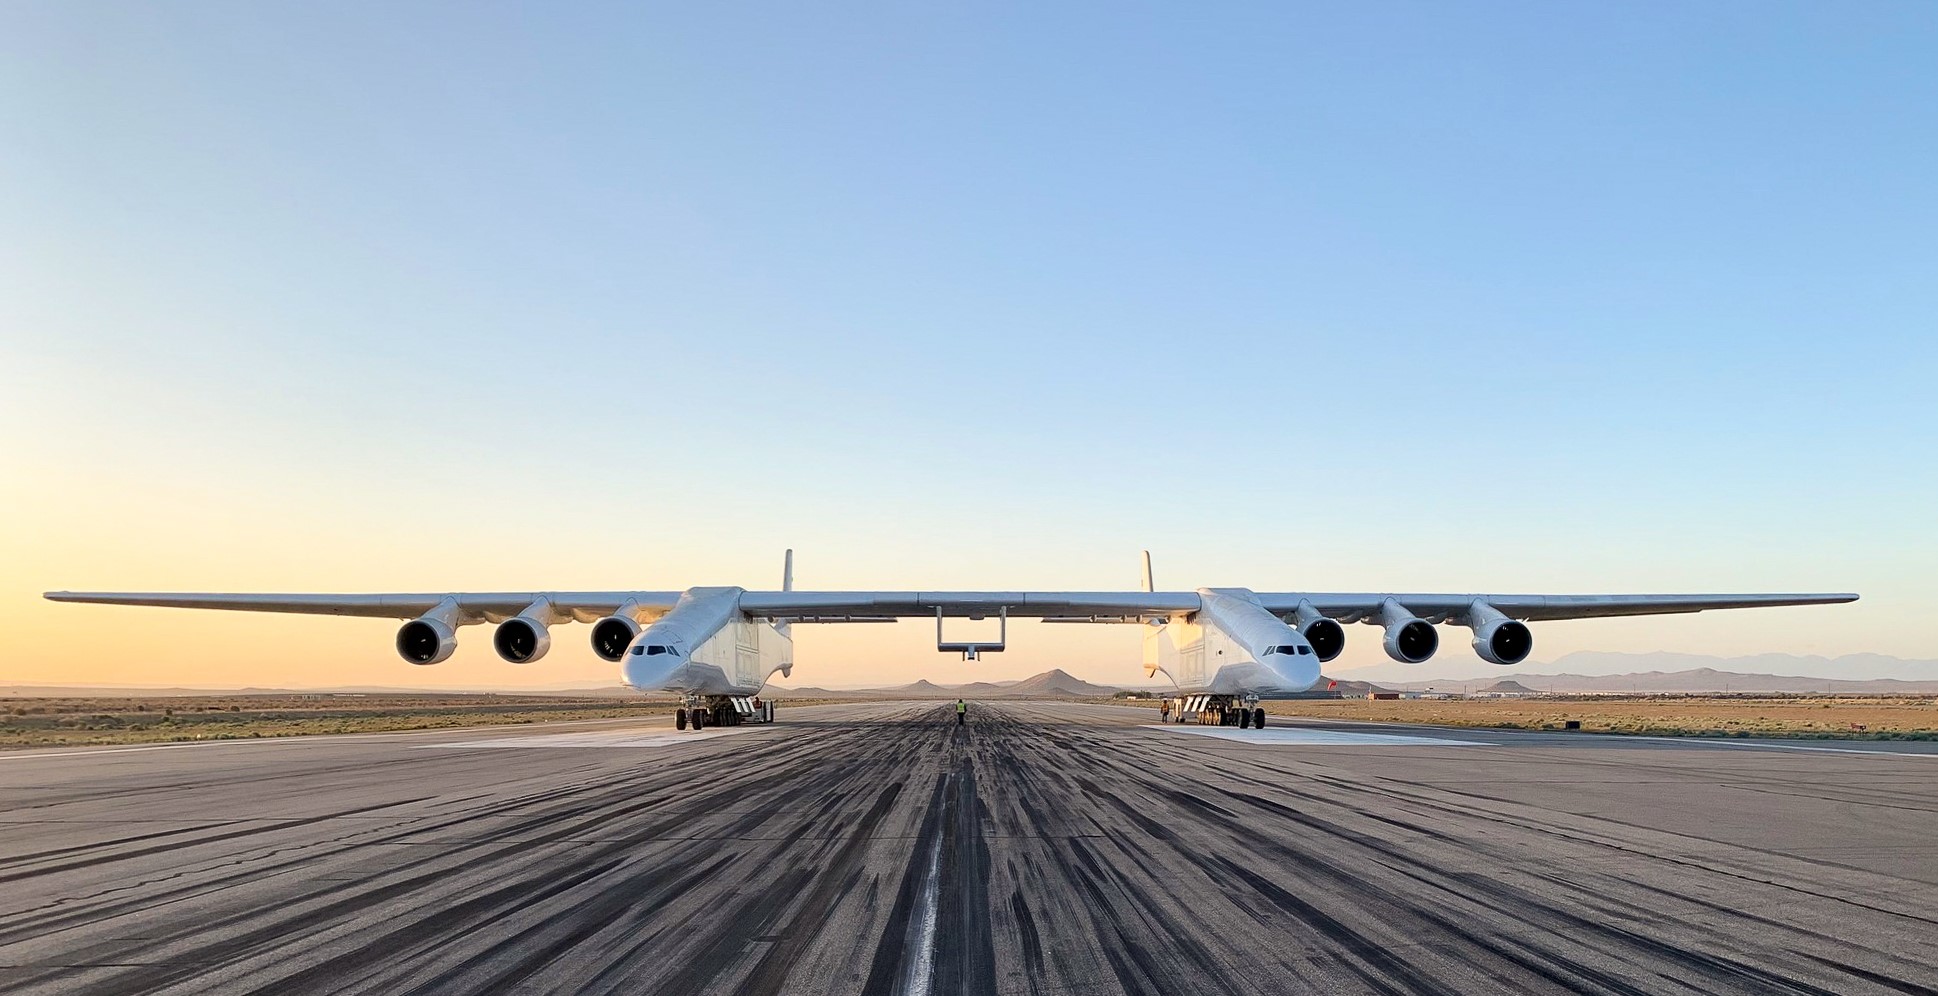 World’s Largest Aircraft Stratolaunch Roc